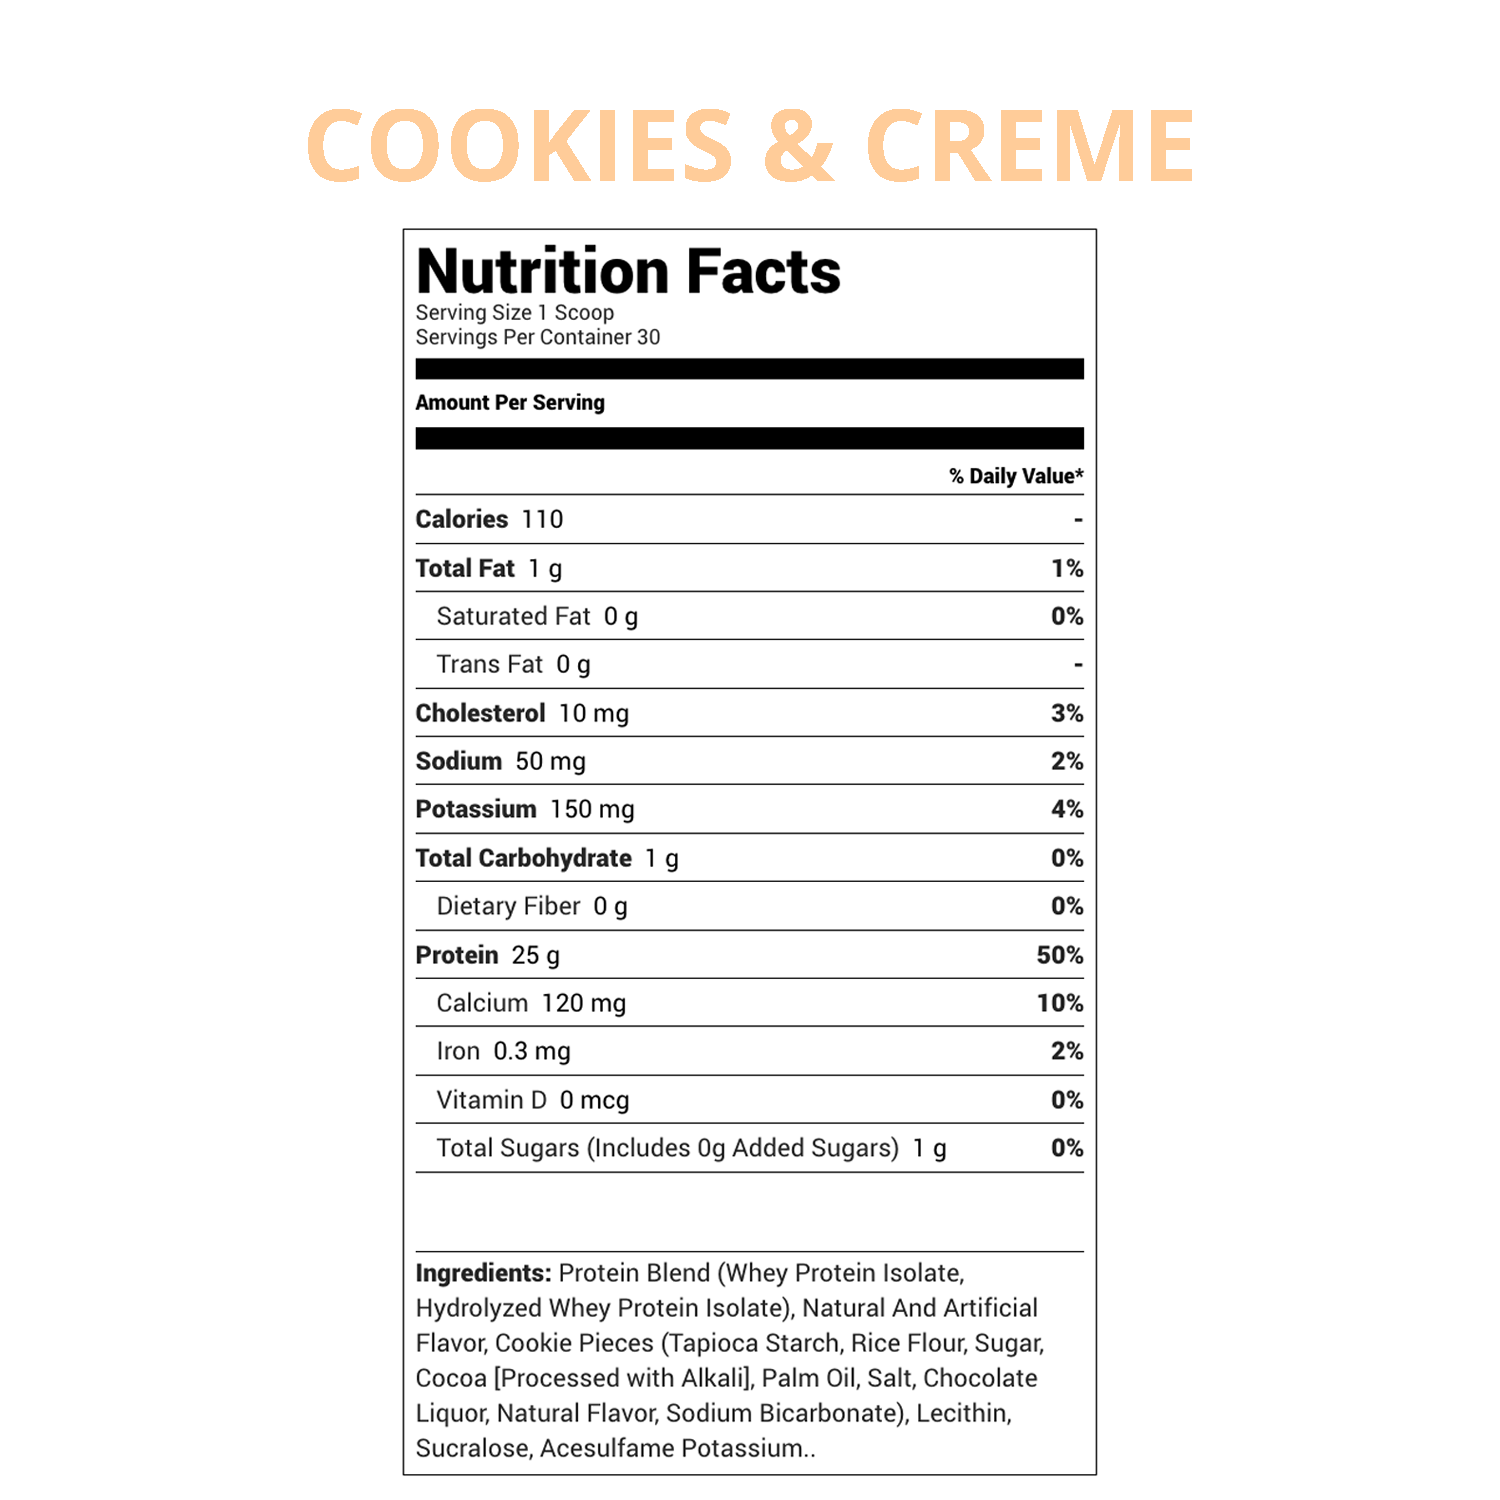 An image of Cookies & Creme - Nutritional Facts